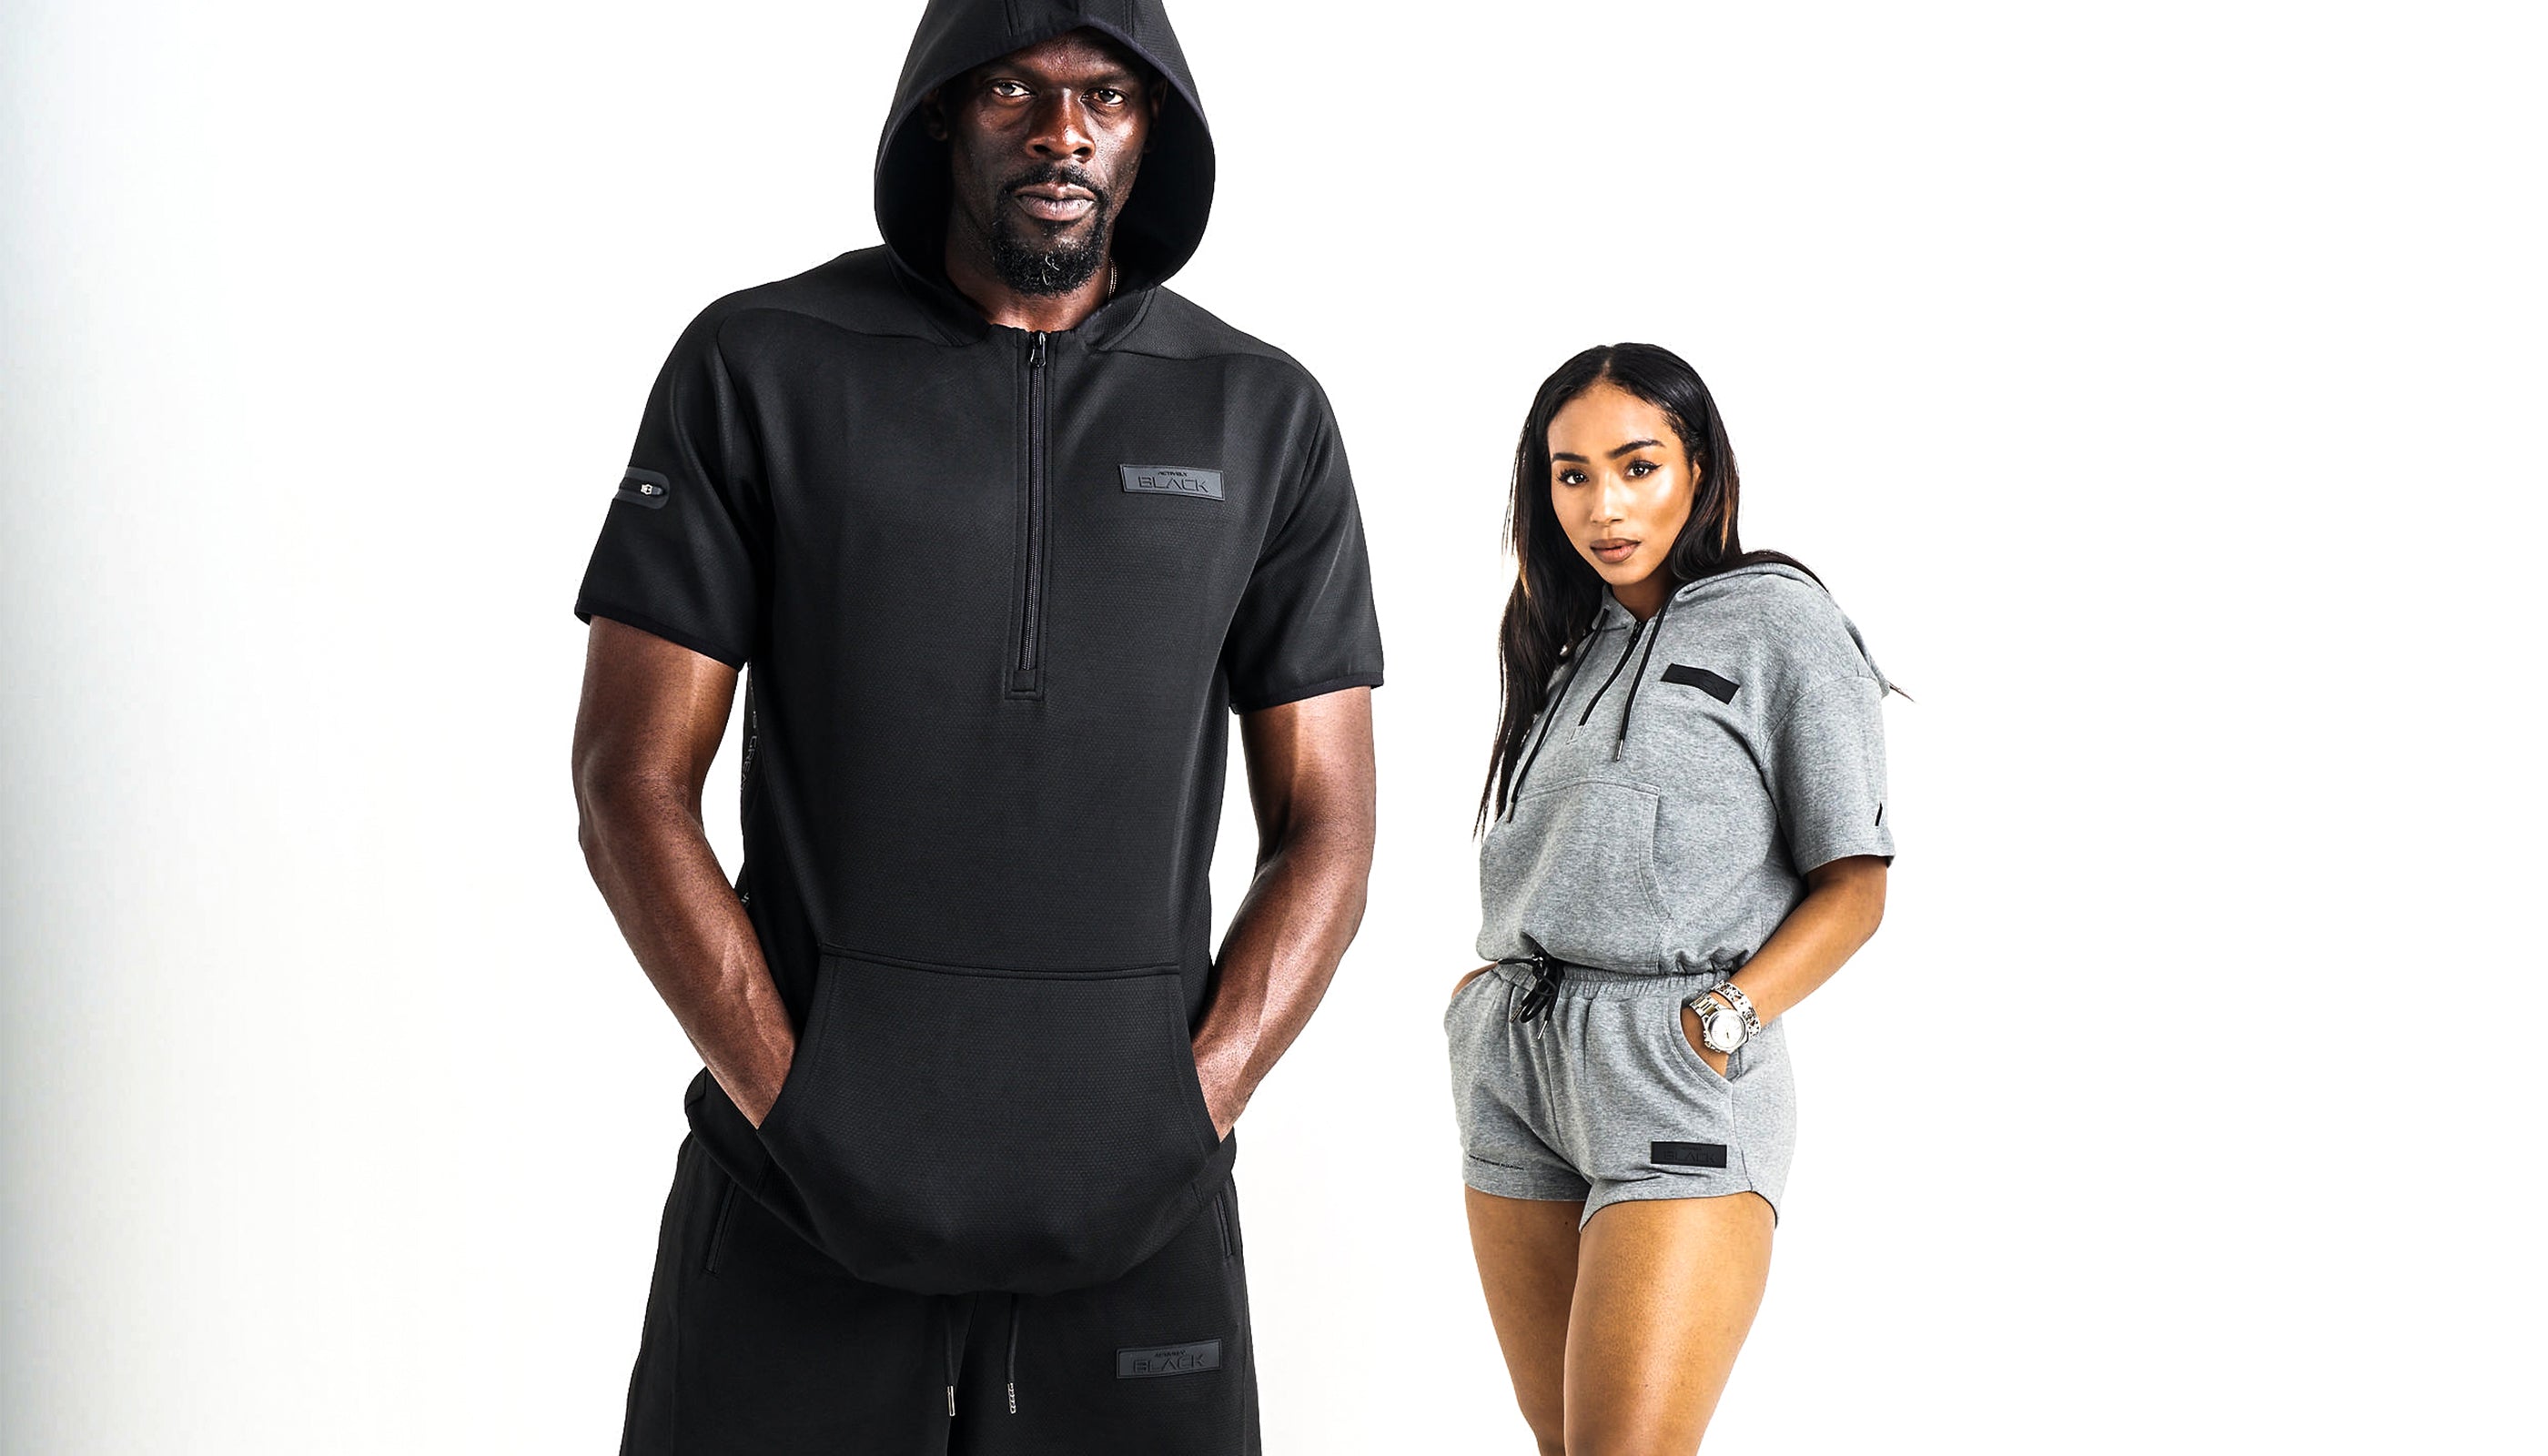 PERFORMANCE TECH SUMMER COLLECTION 2021